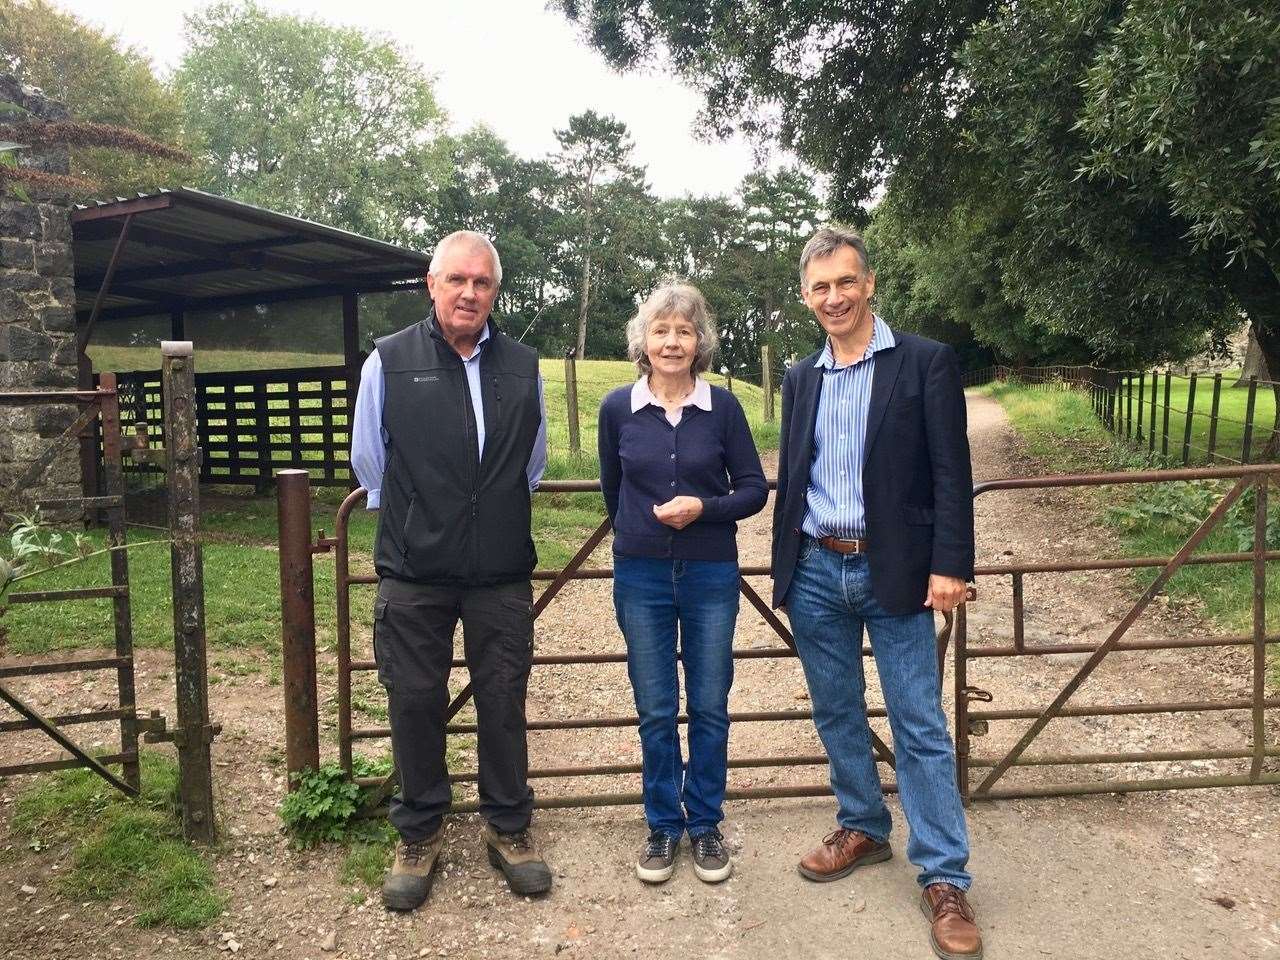 Cllr Frank Boland, chair of Saltwood Parish Council, Jane Clark, the landowner, with Cllr Rory Love. Photo: Cllr Rory Love